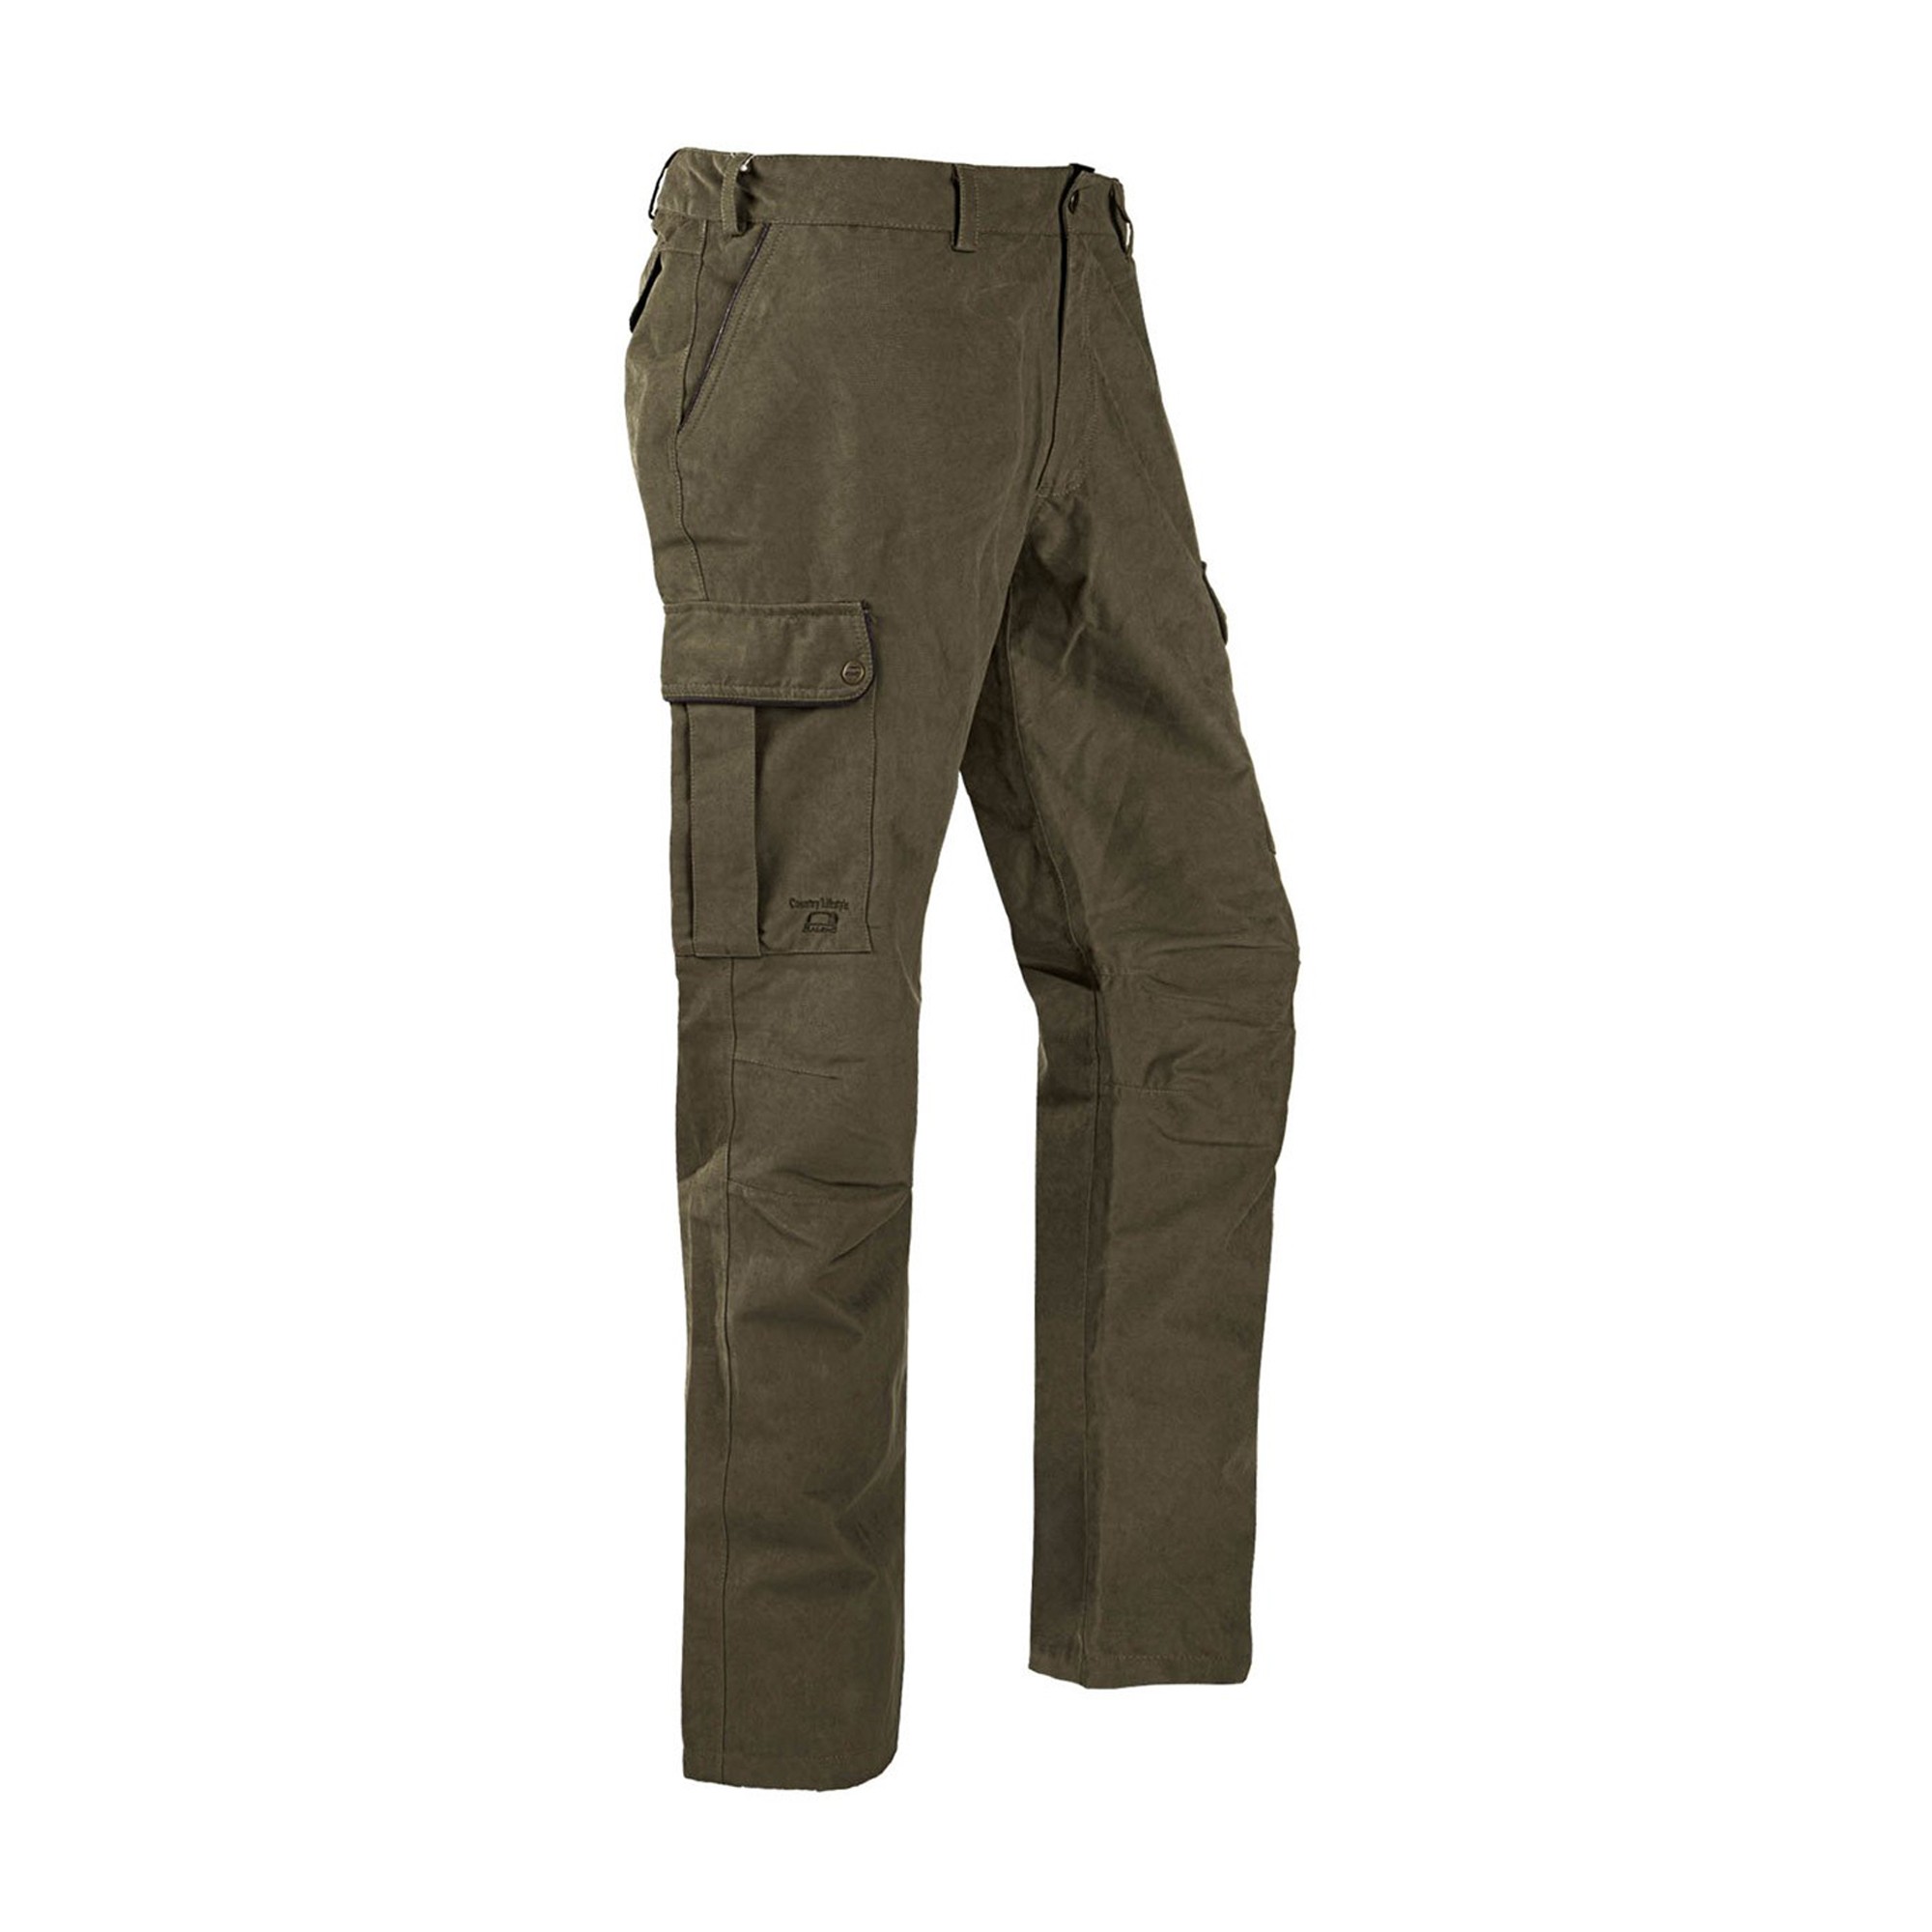 Baleno Men's Derby Trousers - Old Dairy Saddlery